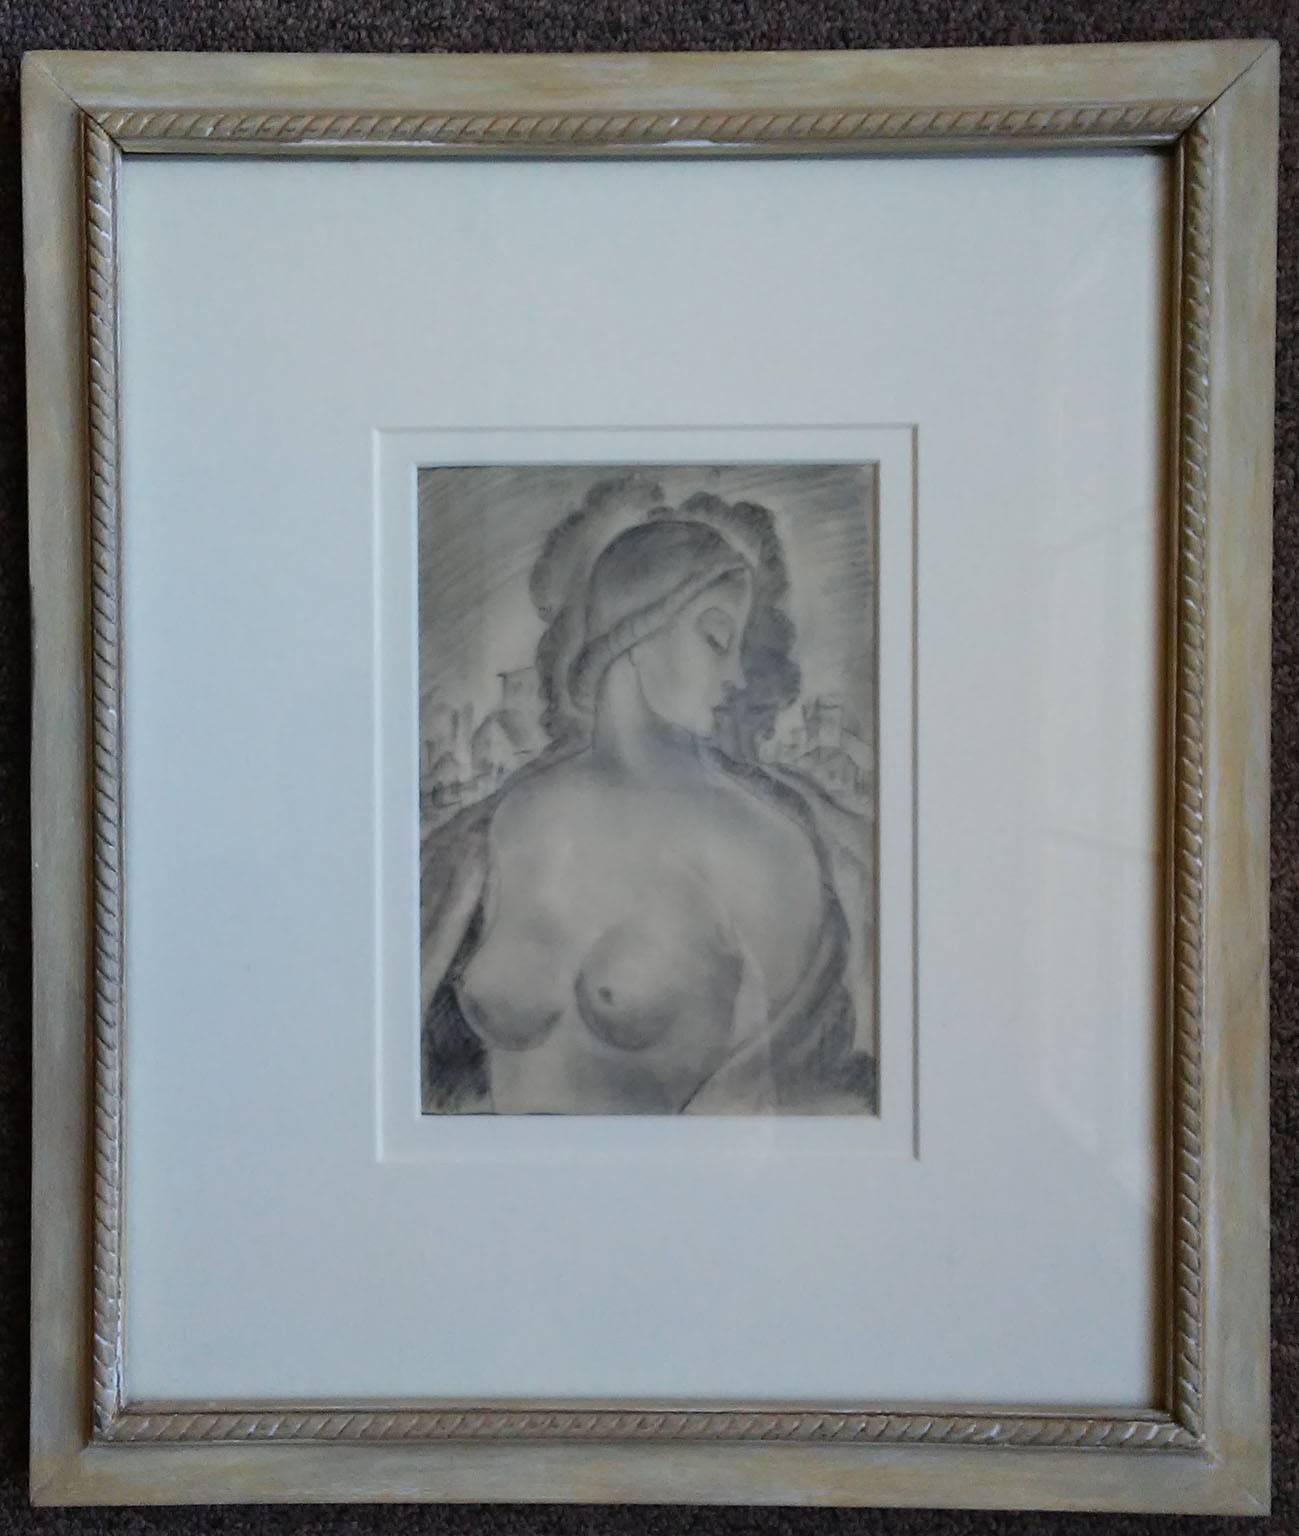 Graphite on paper by African American artist Ralph Chessé.  The drawing is unsigned, has a sight measurement of 6.5 x 4.5 inches, and is housed in an attractive frame measuring 14.75 x 12.5 inches.

Ralph Chessé chose not to disclose his African